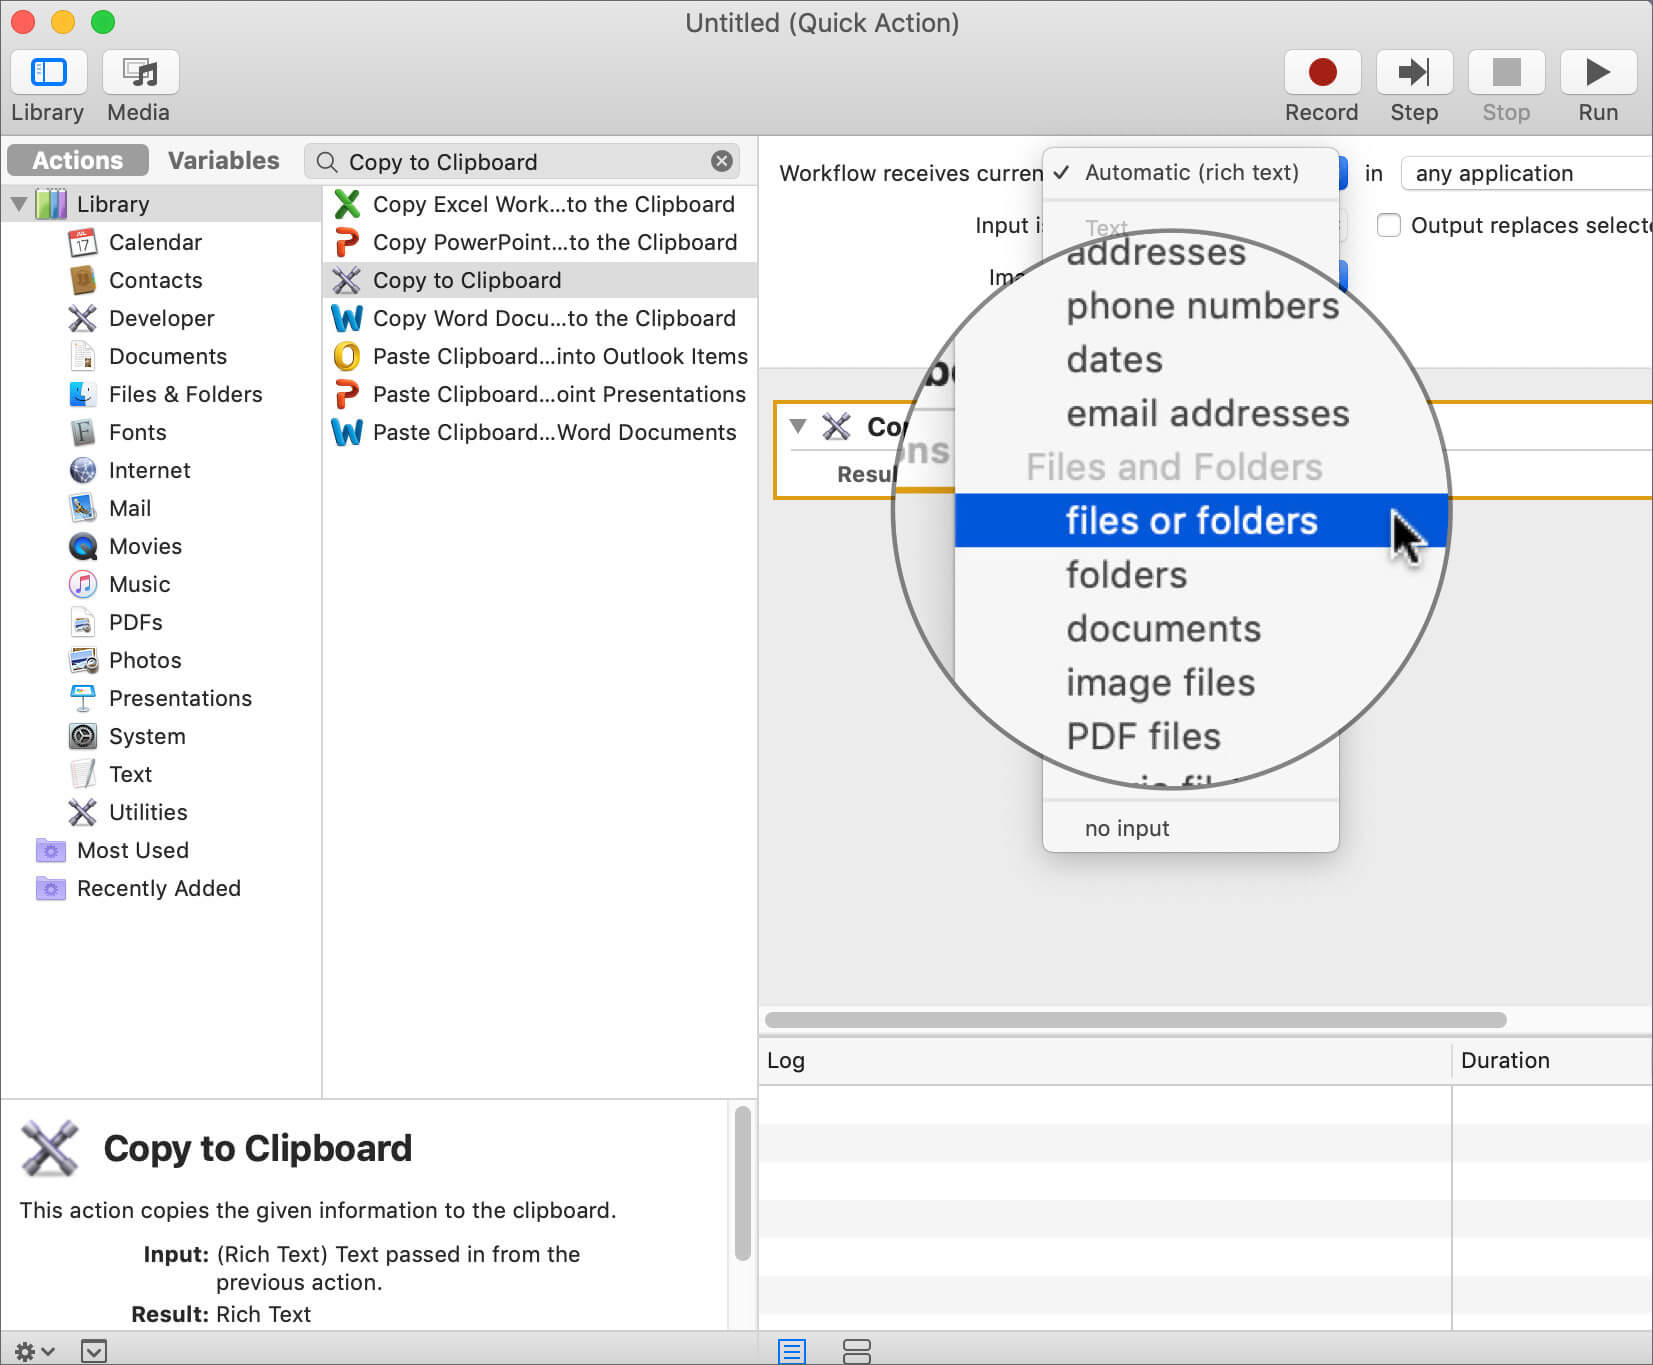 Select files or folder from Workflow receives current menu in Mac Automator App